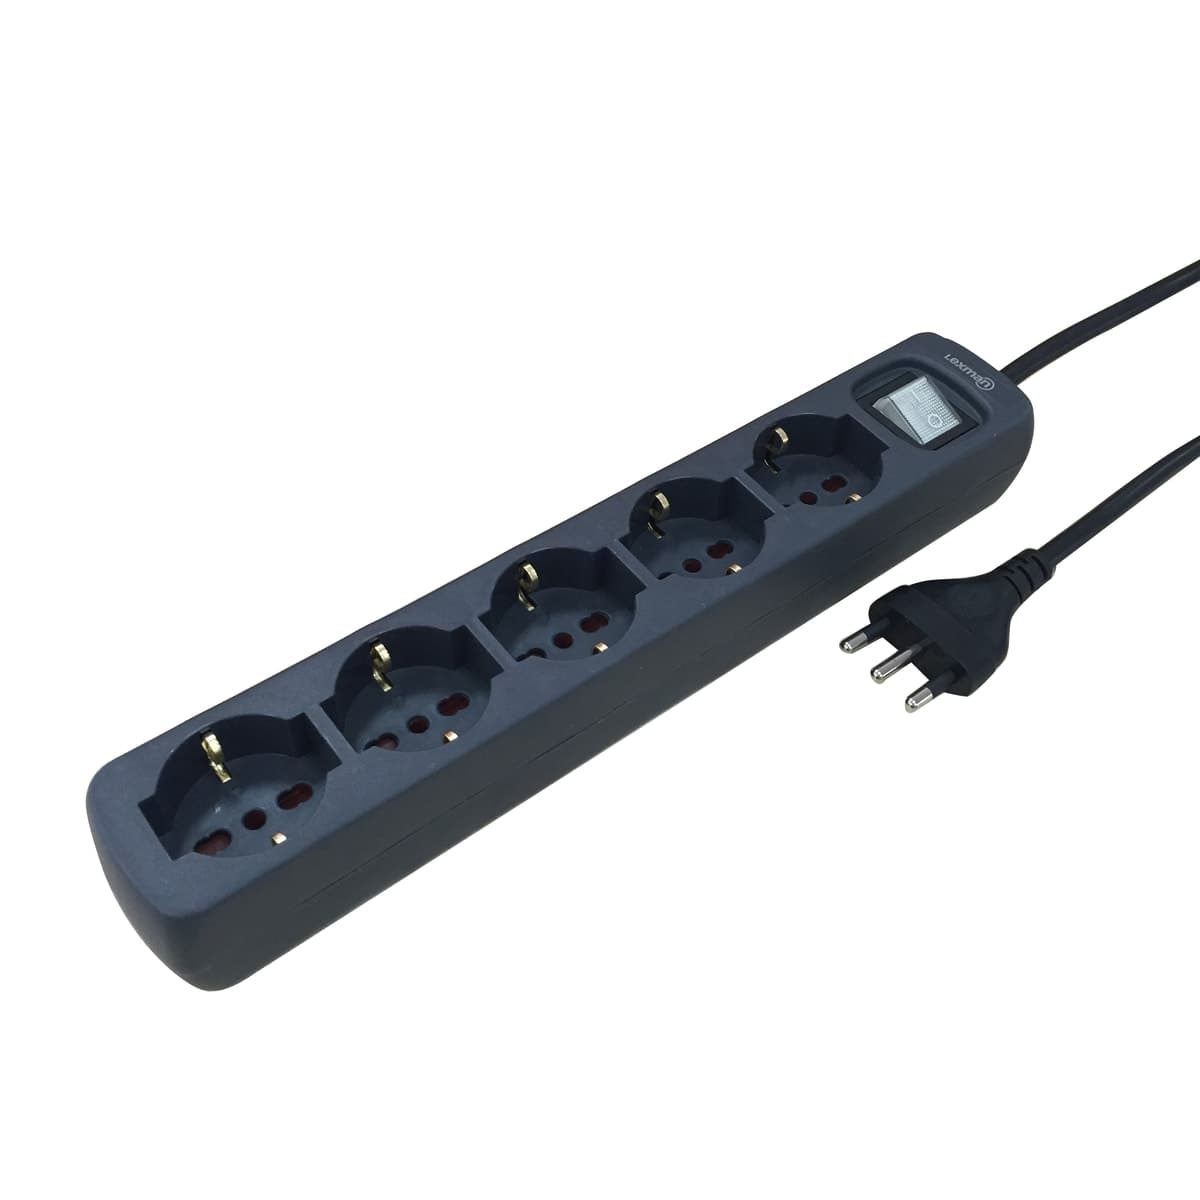 5-POLE UNIVERSAL MULTISOCKET WITH SWITCH 1.5 M CABLE - best price from Maltashopper.com BR420003426